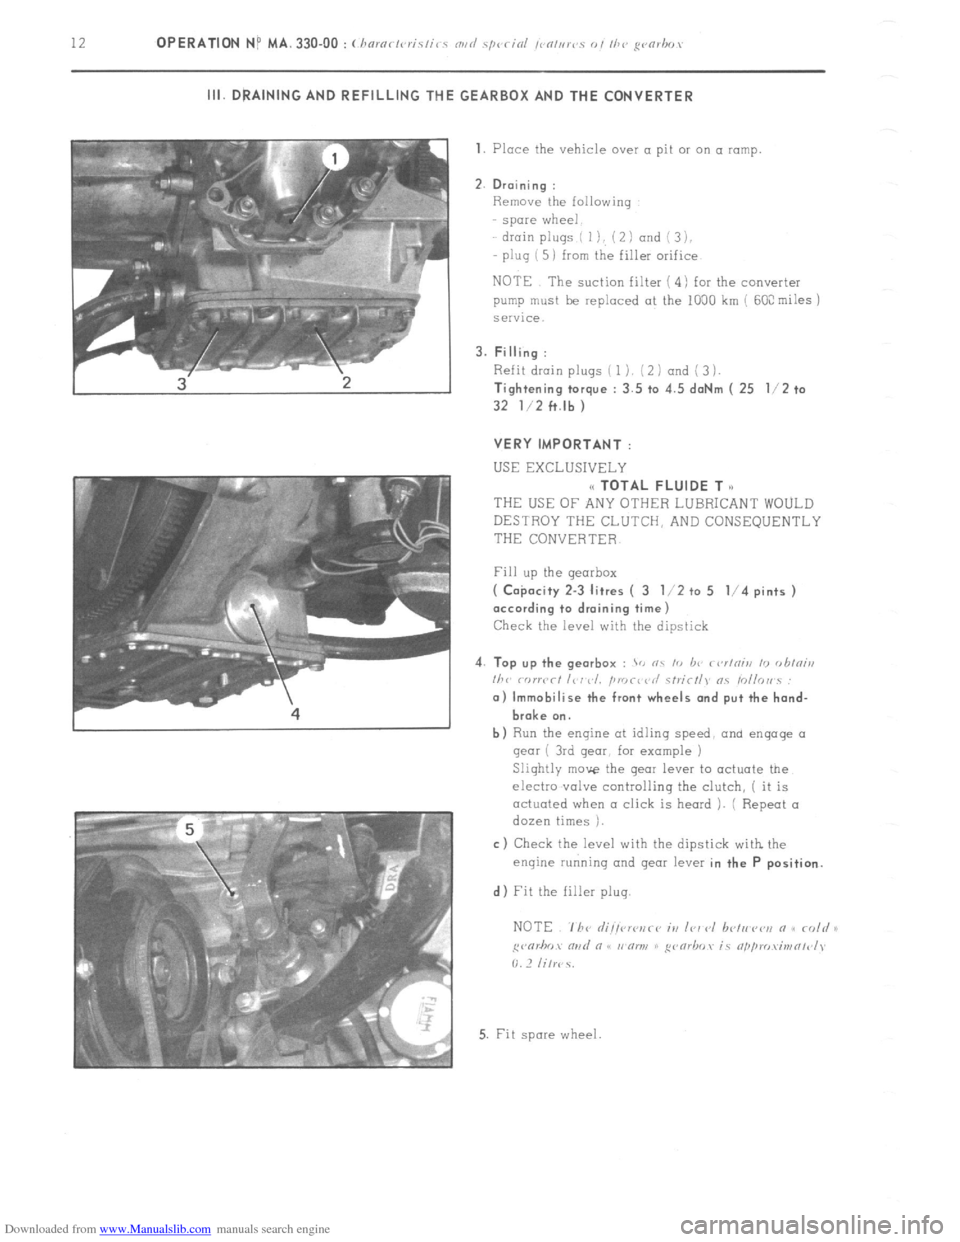 Citroen CX 1985 1.G Workshop Manual Downloaded from www.Manualslib.com manuals search engine 12 OPERATION NP MA. 330.00 : (haro</vr-is/i< c m,</ s/wcinl ,cn,i,rt~. o, I/>? gvmhr,, III. DRAINING AND REFILLING THE GEARBOX AND THE CONVERTE